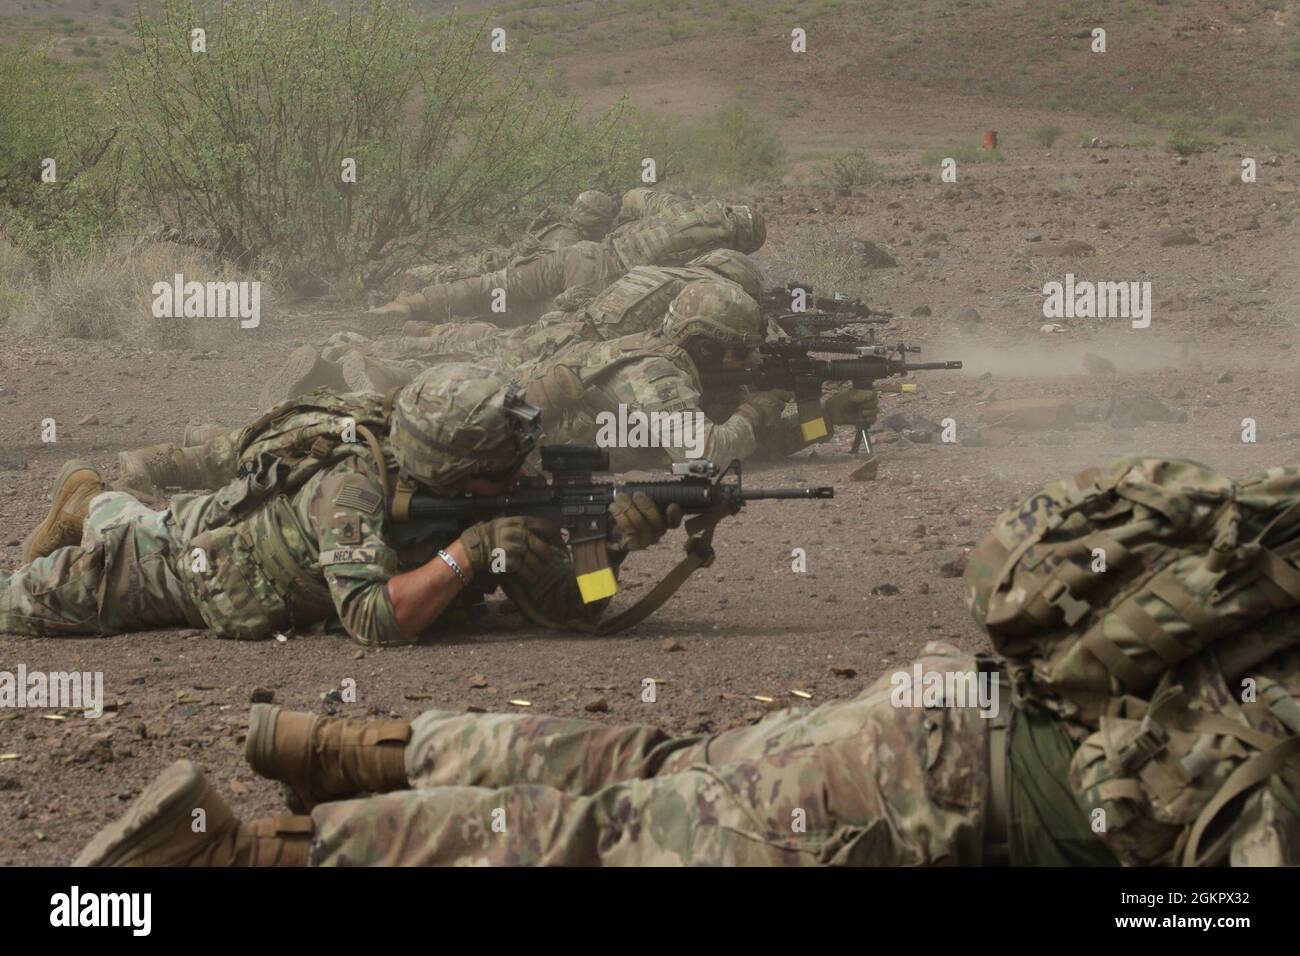 U.S. Army Soldiers assigned to Apache Company integrate with a heavy weapons platoon assigned to Dagger Company, both 1-102d Infantry Regiment (Mountain), 86th Infantry Brigade Combat Team, to conduct a platoon live fire in Djibouti, June 15, 2021.    Dagger Company, Task Force Iron Gray's Quick Reaction Force (QRF), utilized the Common Remotely Operated Weapon Station (CROWS), mounted with an M240, to provide fire support to dismounted troops during the platoon live fire.    Apache Company serves as the East Africa Response Force (EARF), which provides a combat-ready rapid deployment capabili Stock Photo